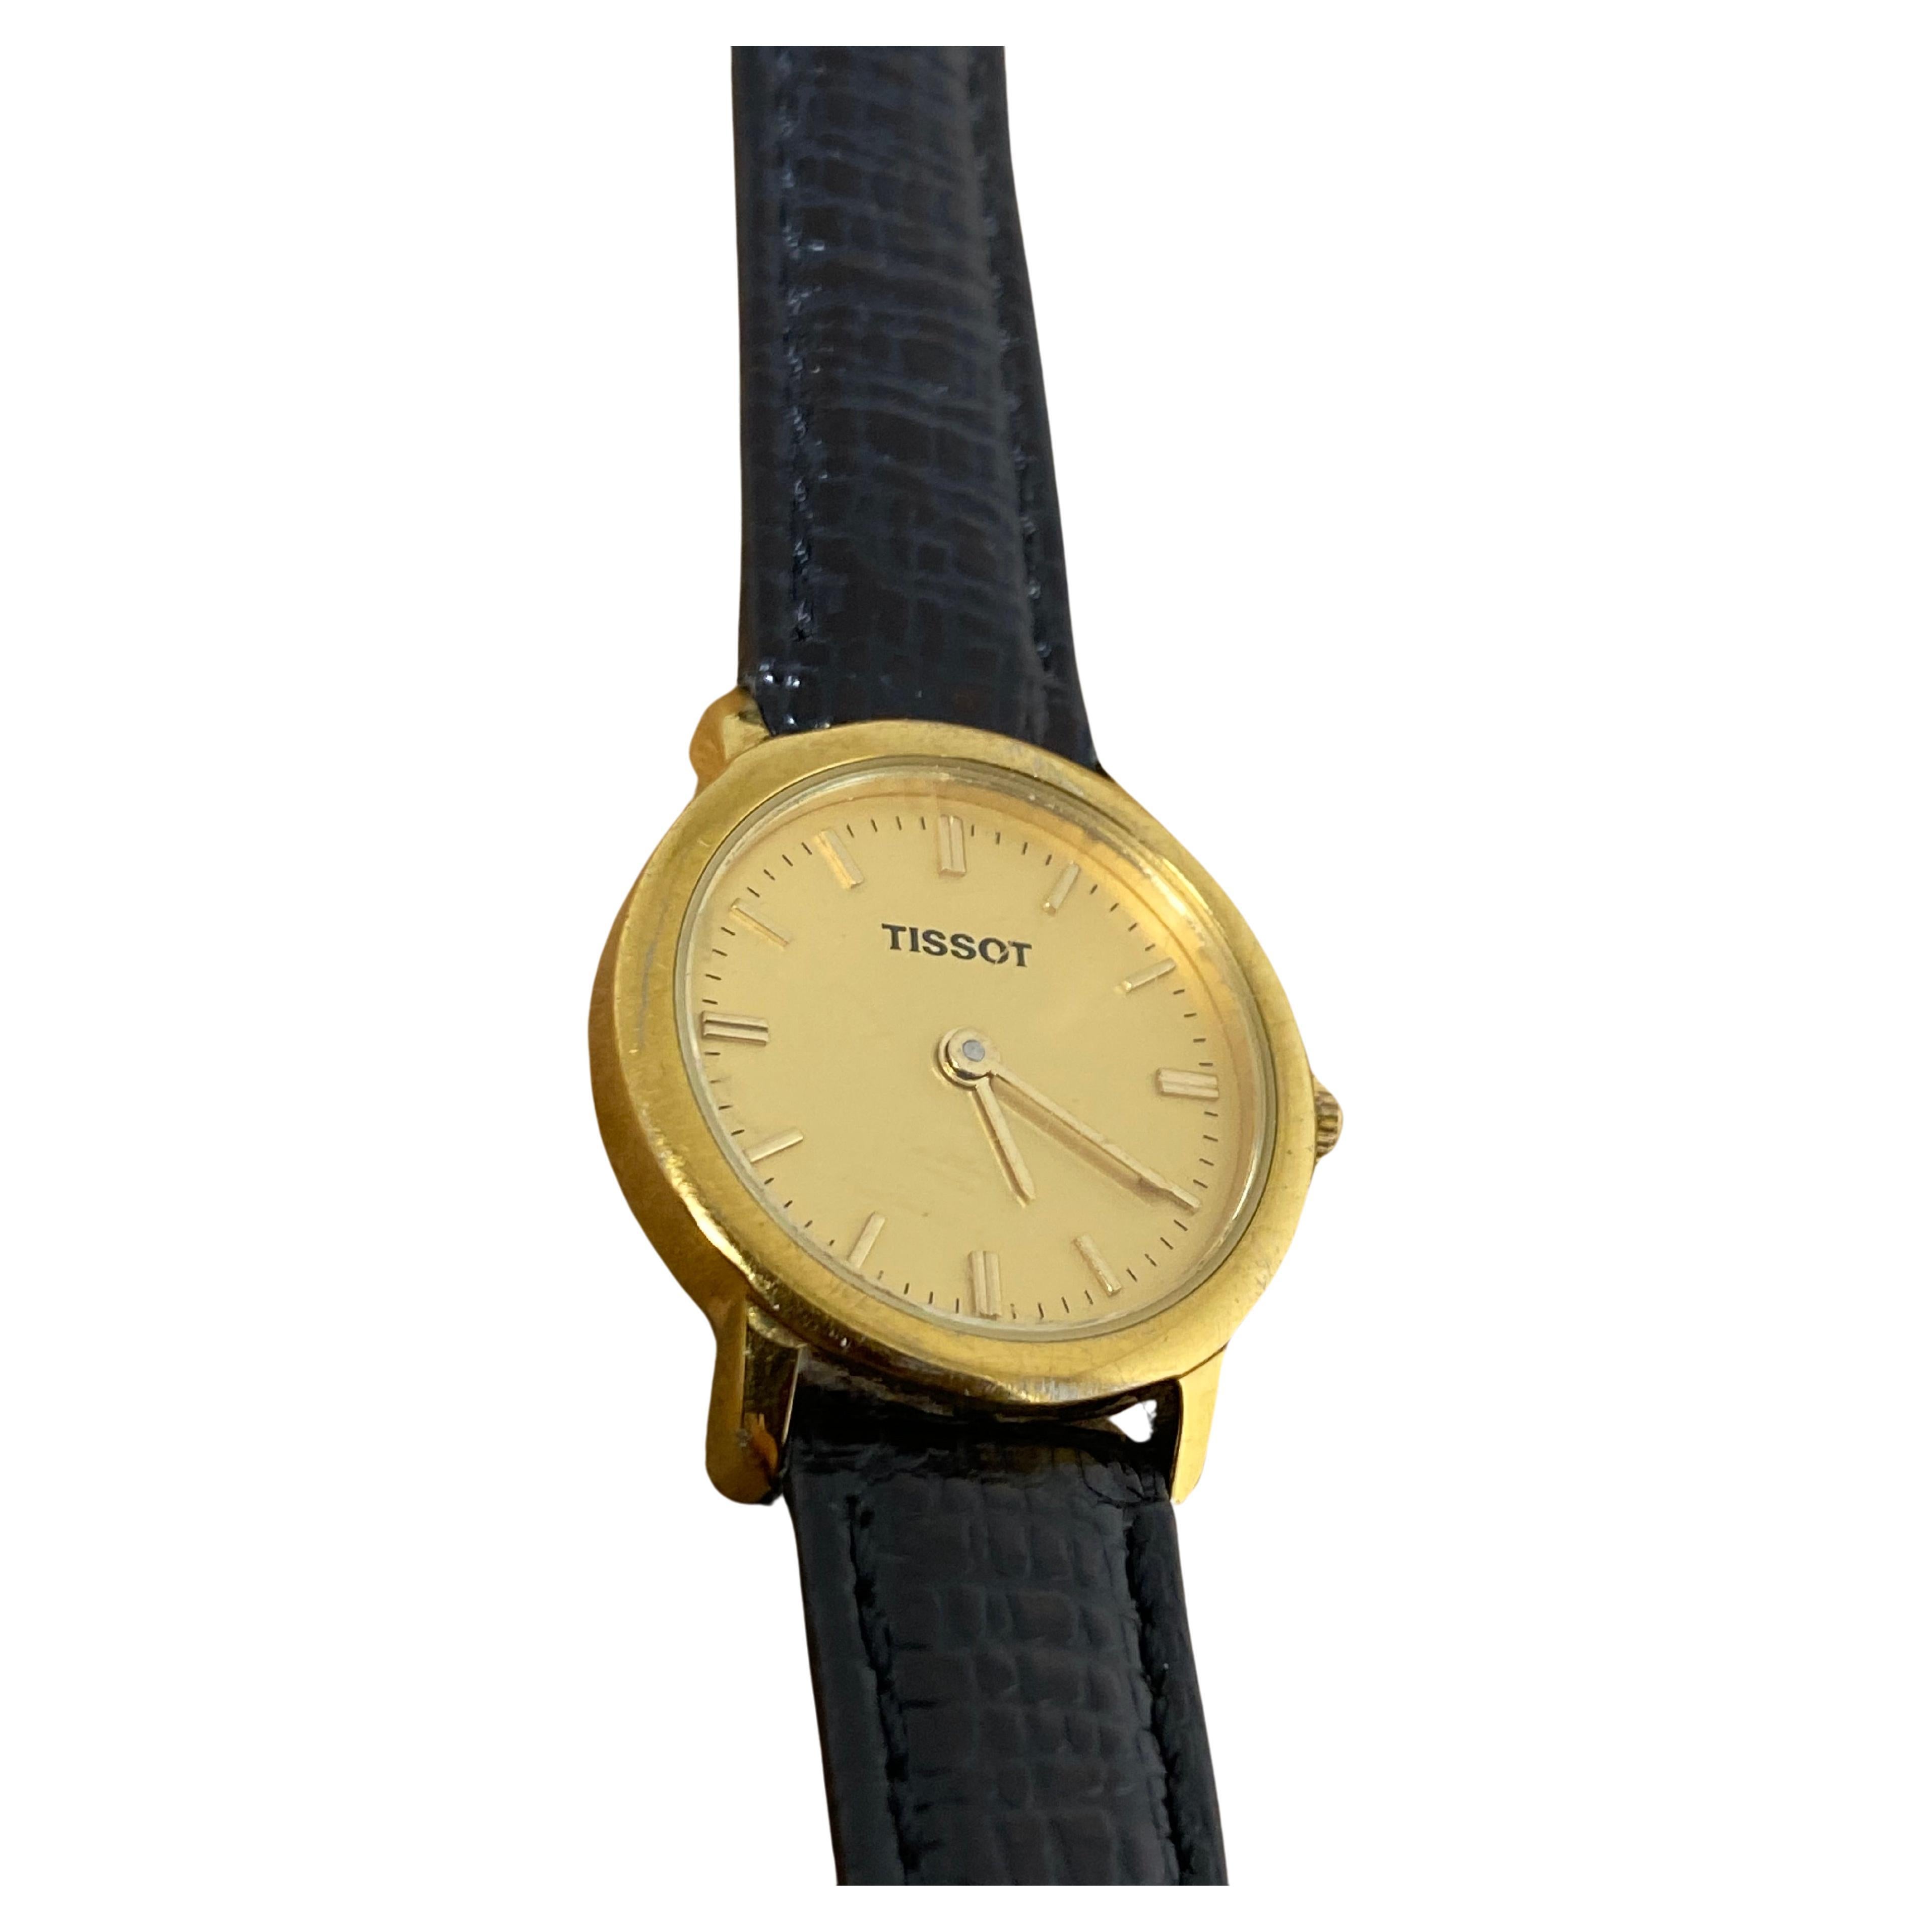 Tissot Gold Plated S/Steel Champagne Dial Swiss Quartz 23mm Ladies' Watch. For Sale